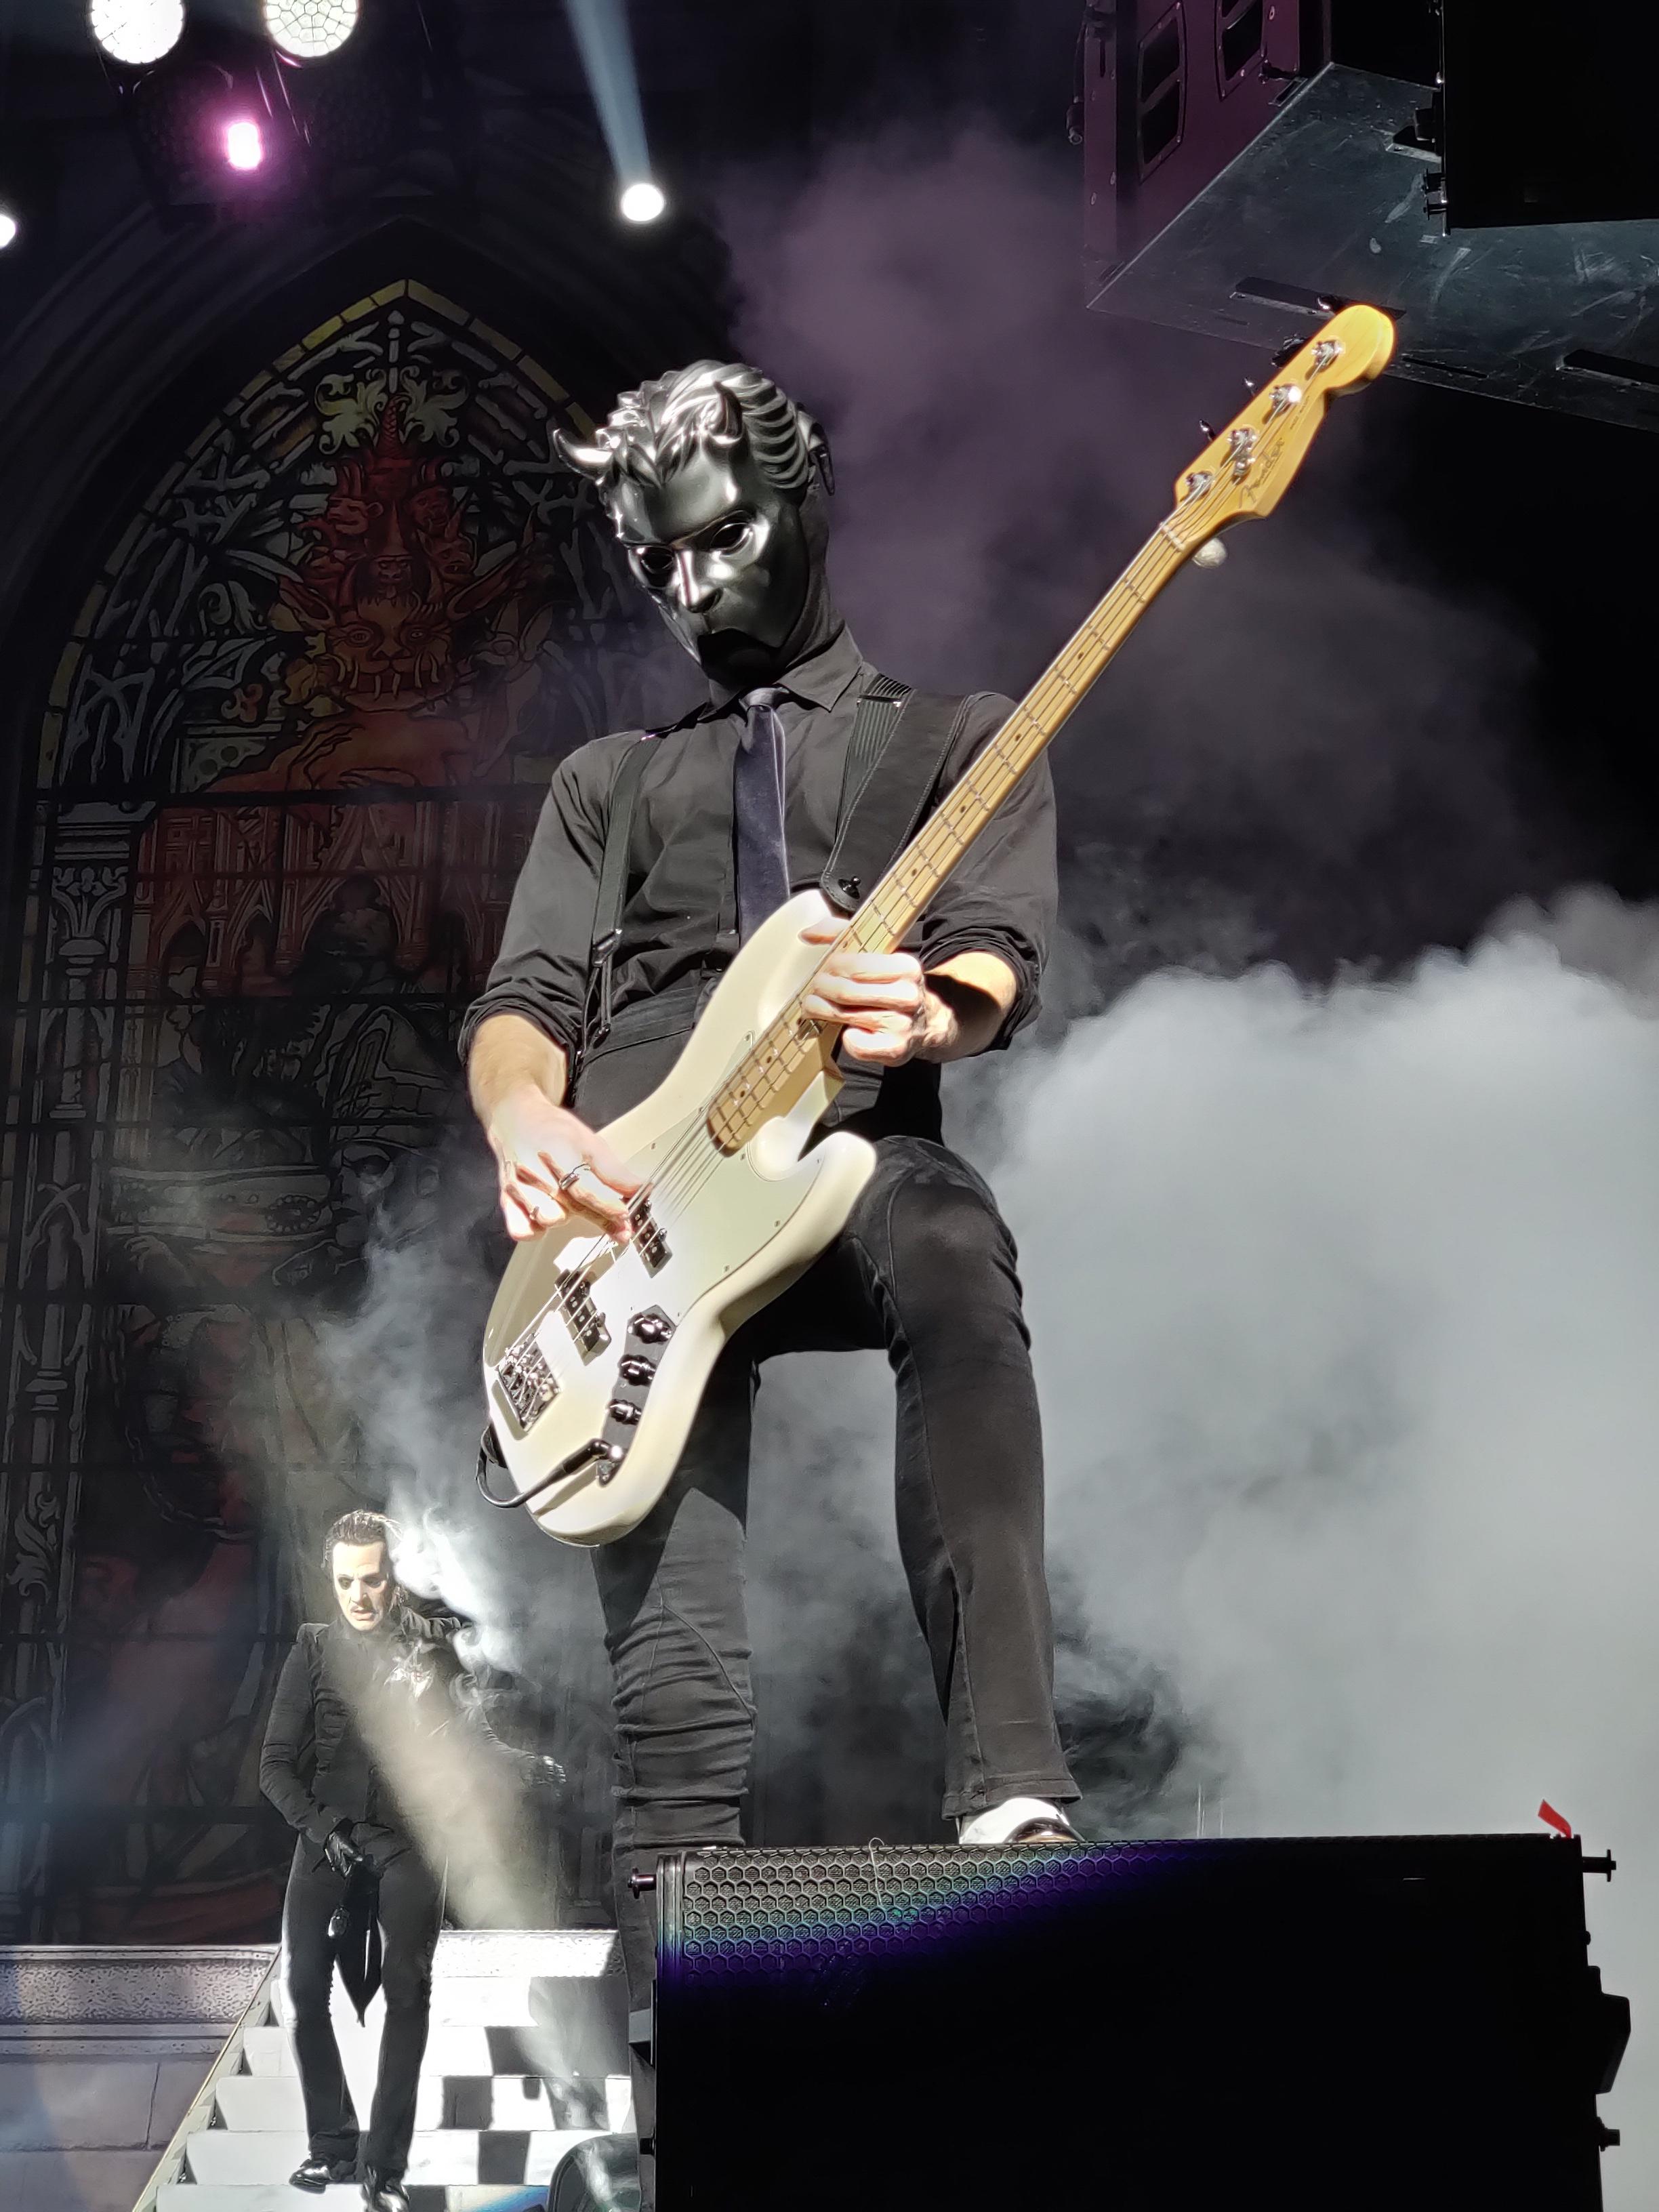 Here are some good picture I took with my phone from the nameless ghouls, Ghost band tour in France in 2019you can use these image as your backgroundwm wallpaper or wtver. I'll